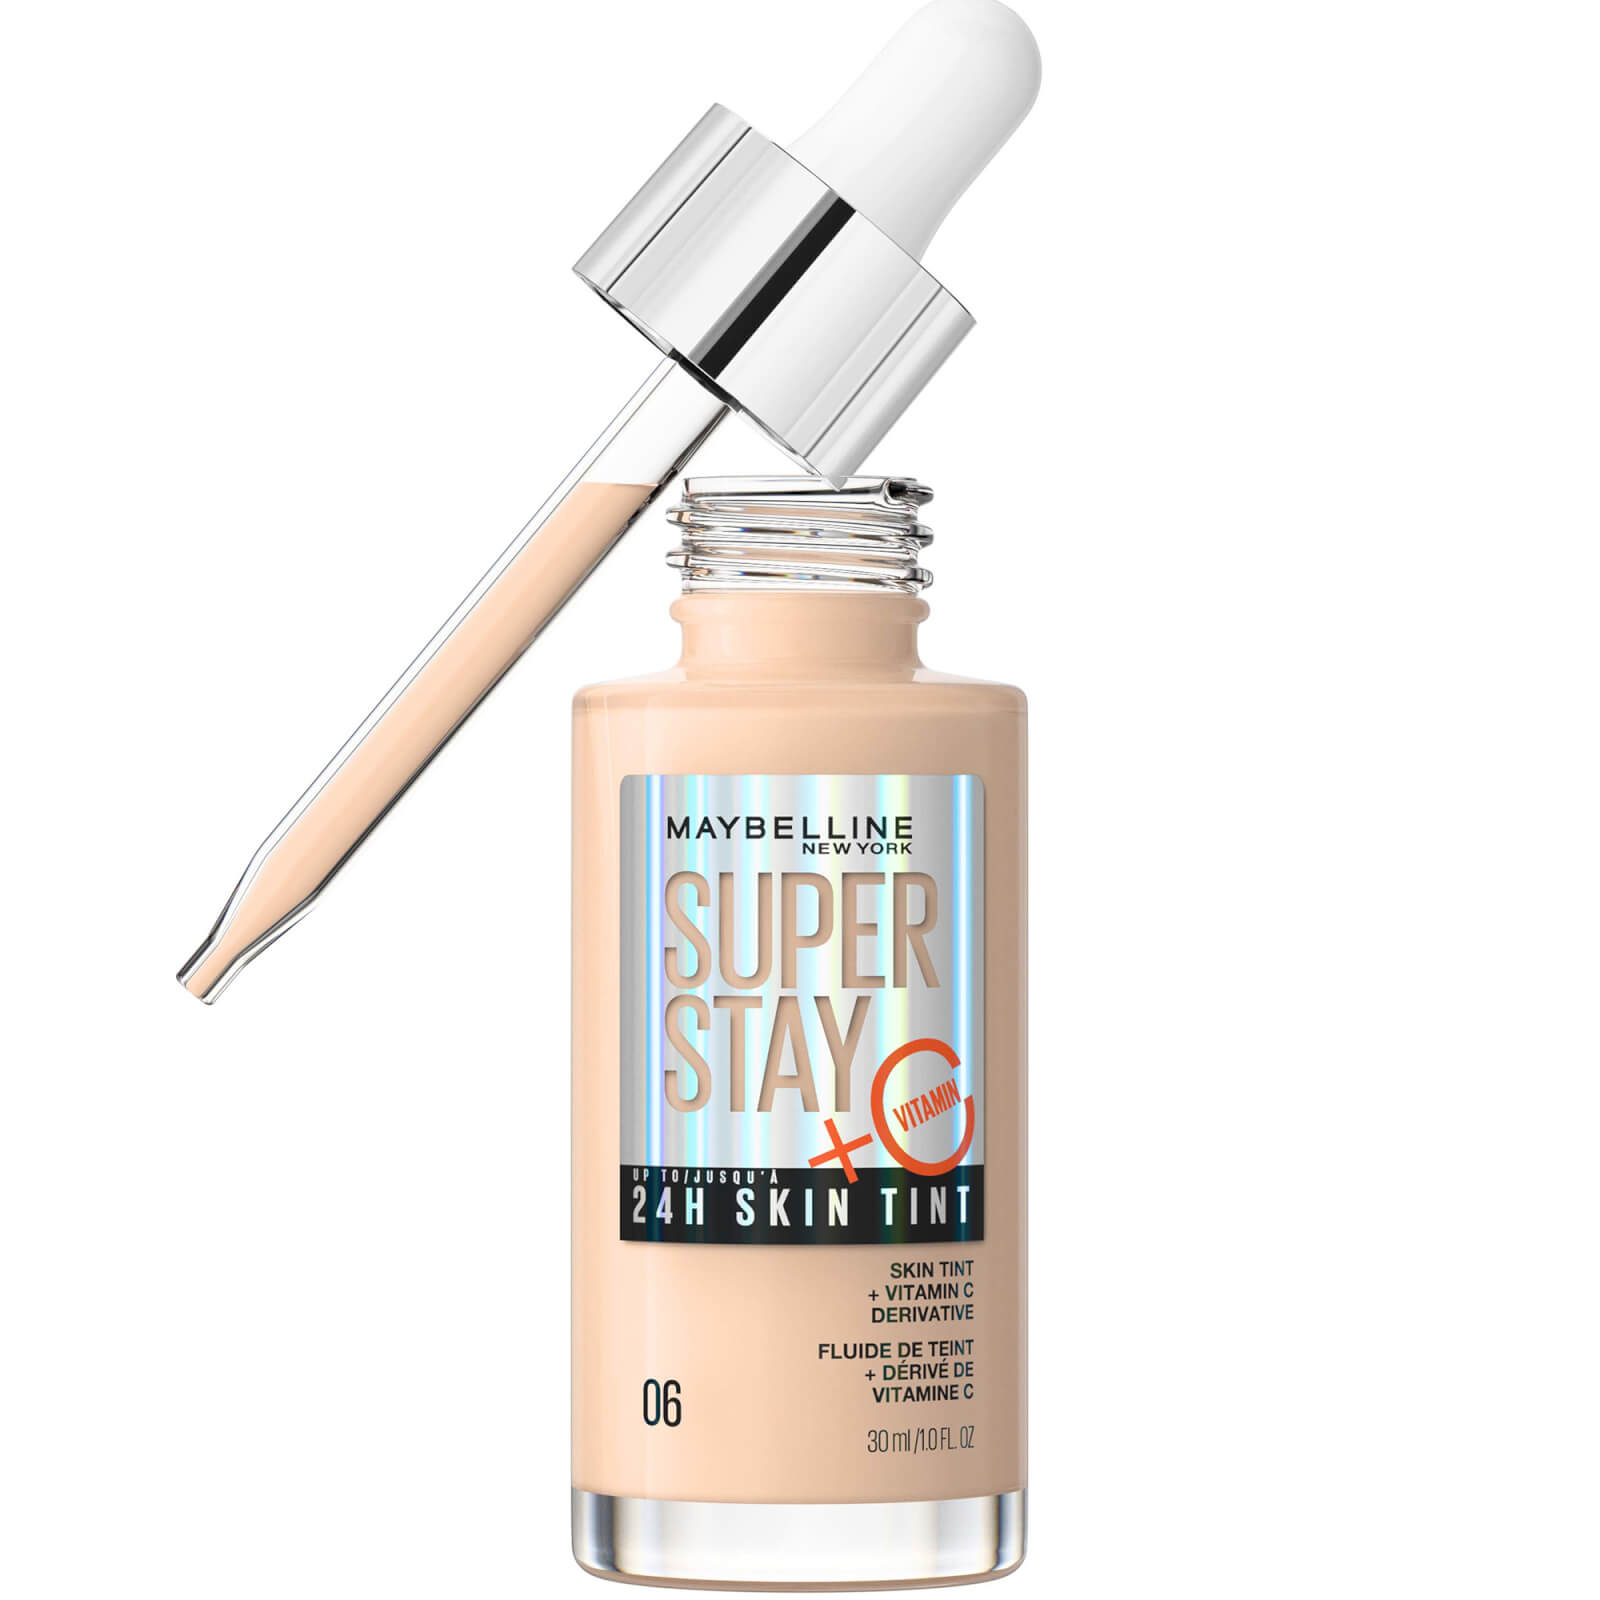 maybelline super stay up to 24h skin tint foundation + vitamin c 30ml (various shades) - 6